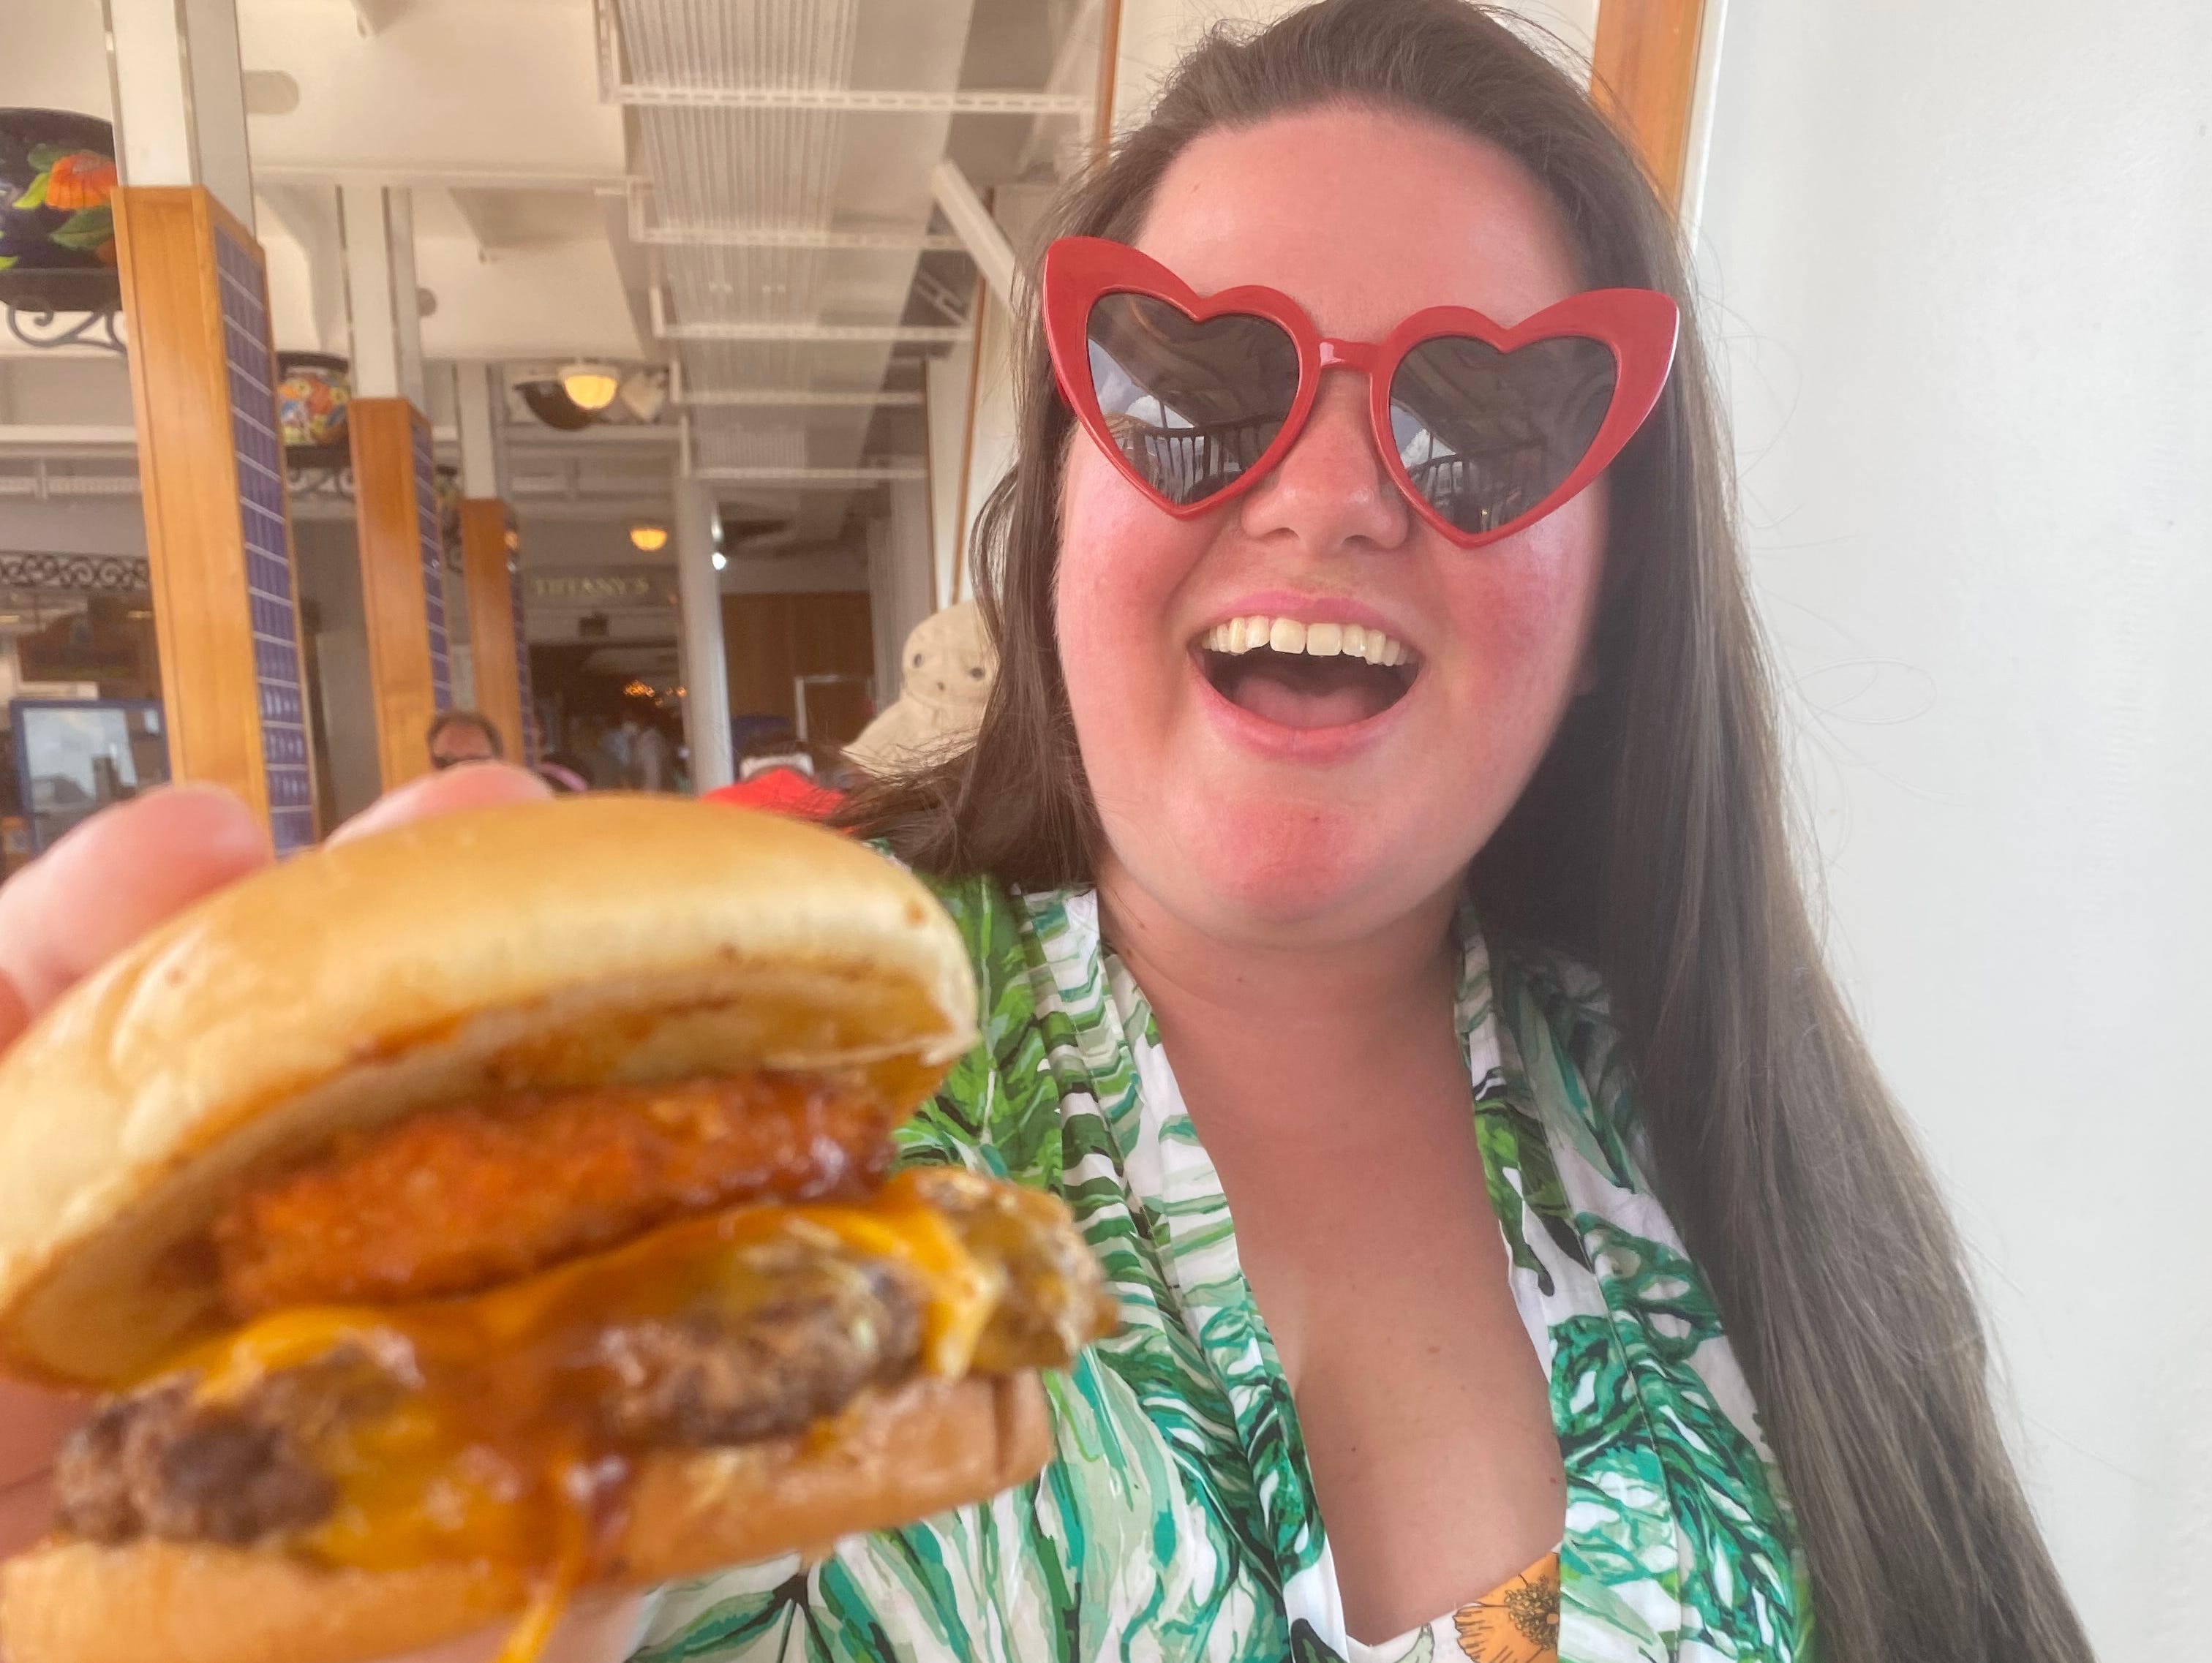 <ul class="summary-list"> <li>I tried Guy's Burger Joint, a <a href="https://www.insider.com/guy-fieri-fun-facts-2018-11">Guy Fieri</a>-created restaurant that's on all Carnival cruise ships.</li> <li>The menu has five different burgers and a wide array of toppings and sauces.</li> <li>My favorite burger had two patties — one was made of beef and the other of bacon.</li> </ul><div class="read-original">Read the original article on <a href="https://www.businessinsider.com/guy-fieri-burger-restuarant-on-carnival-elation-cruise-review-2022-7">Business Insider</a></div>